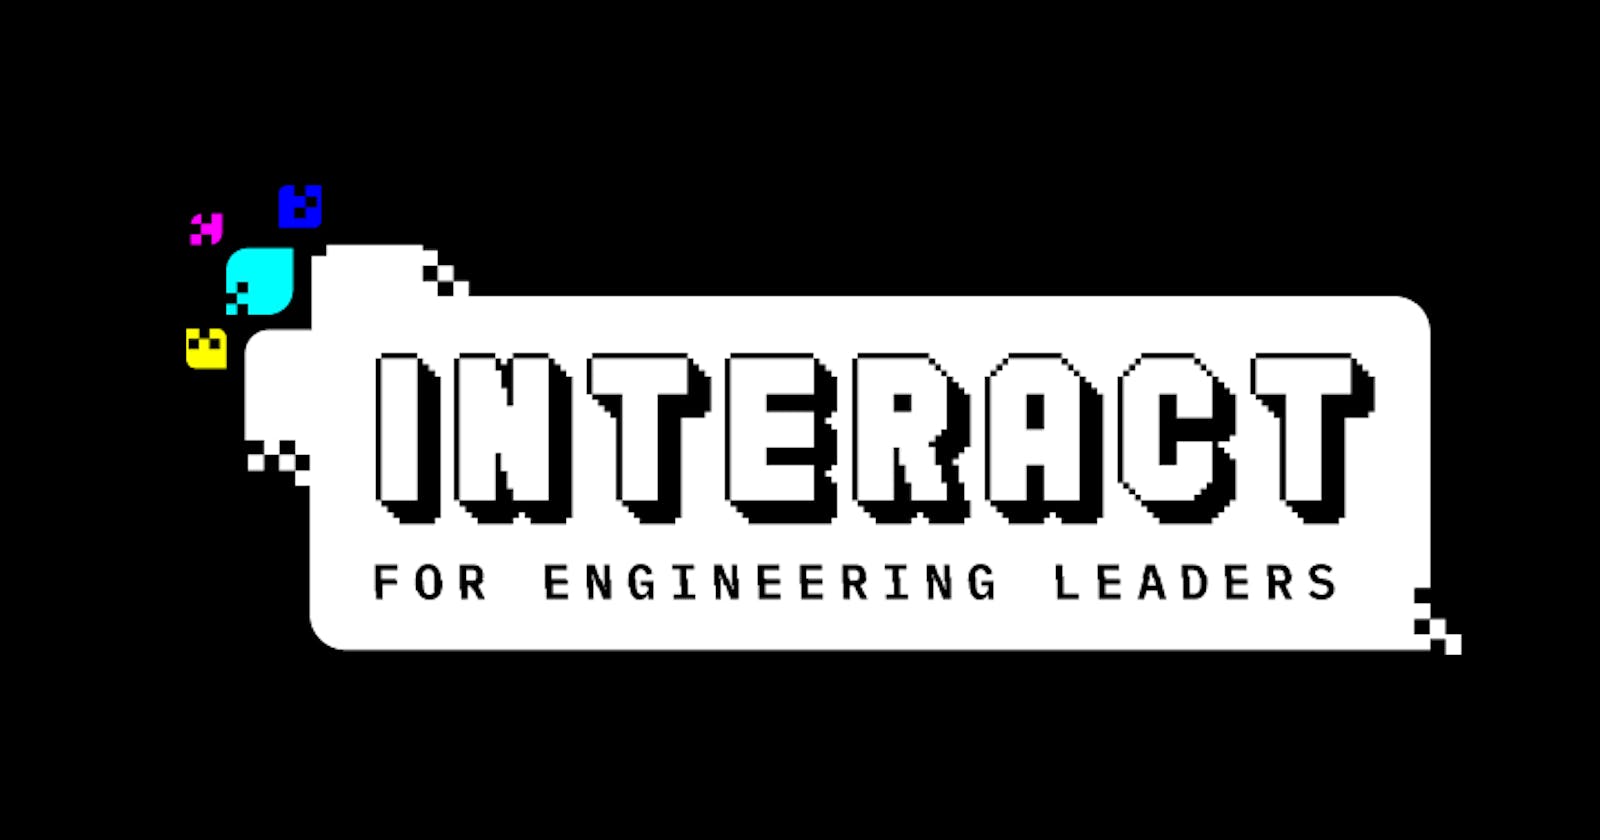 INTERACT: The Interactive, Community-driven Conference for Engineering Leaders